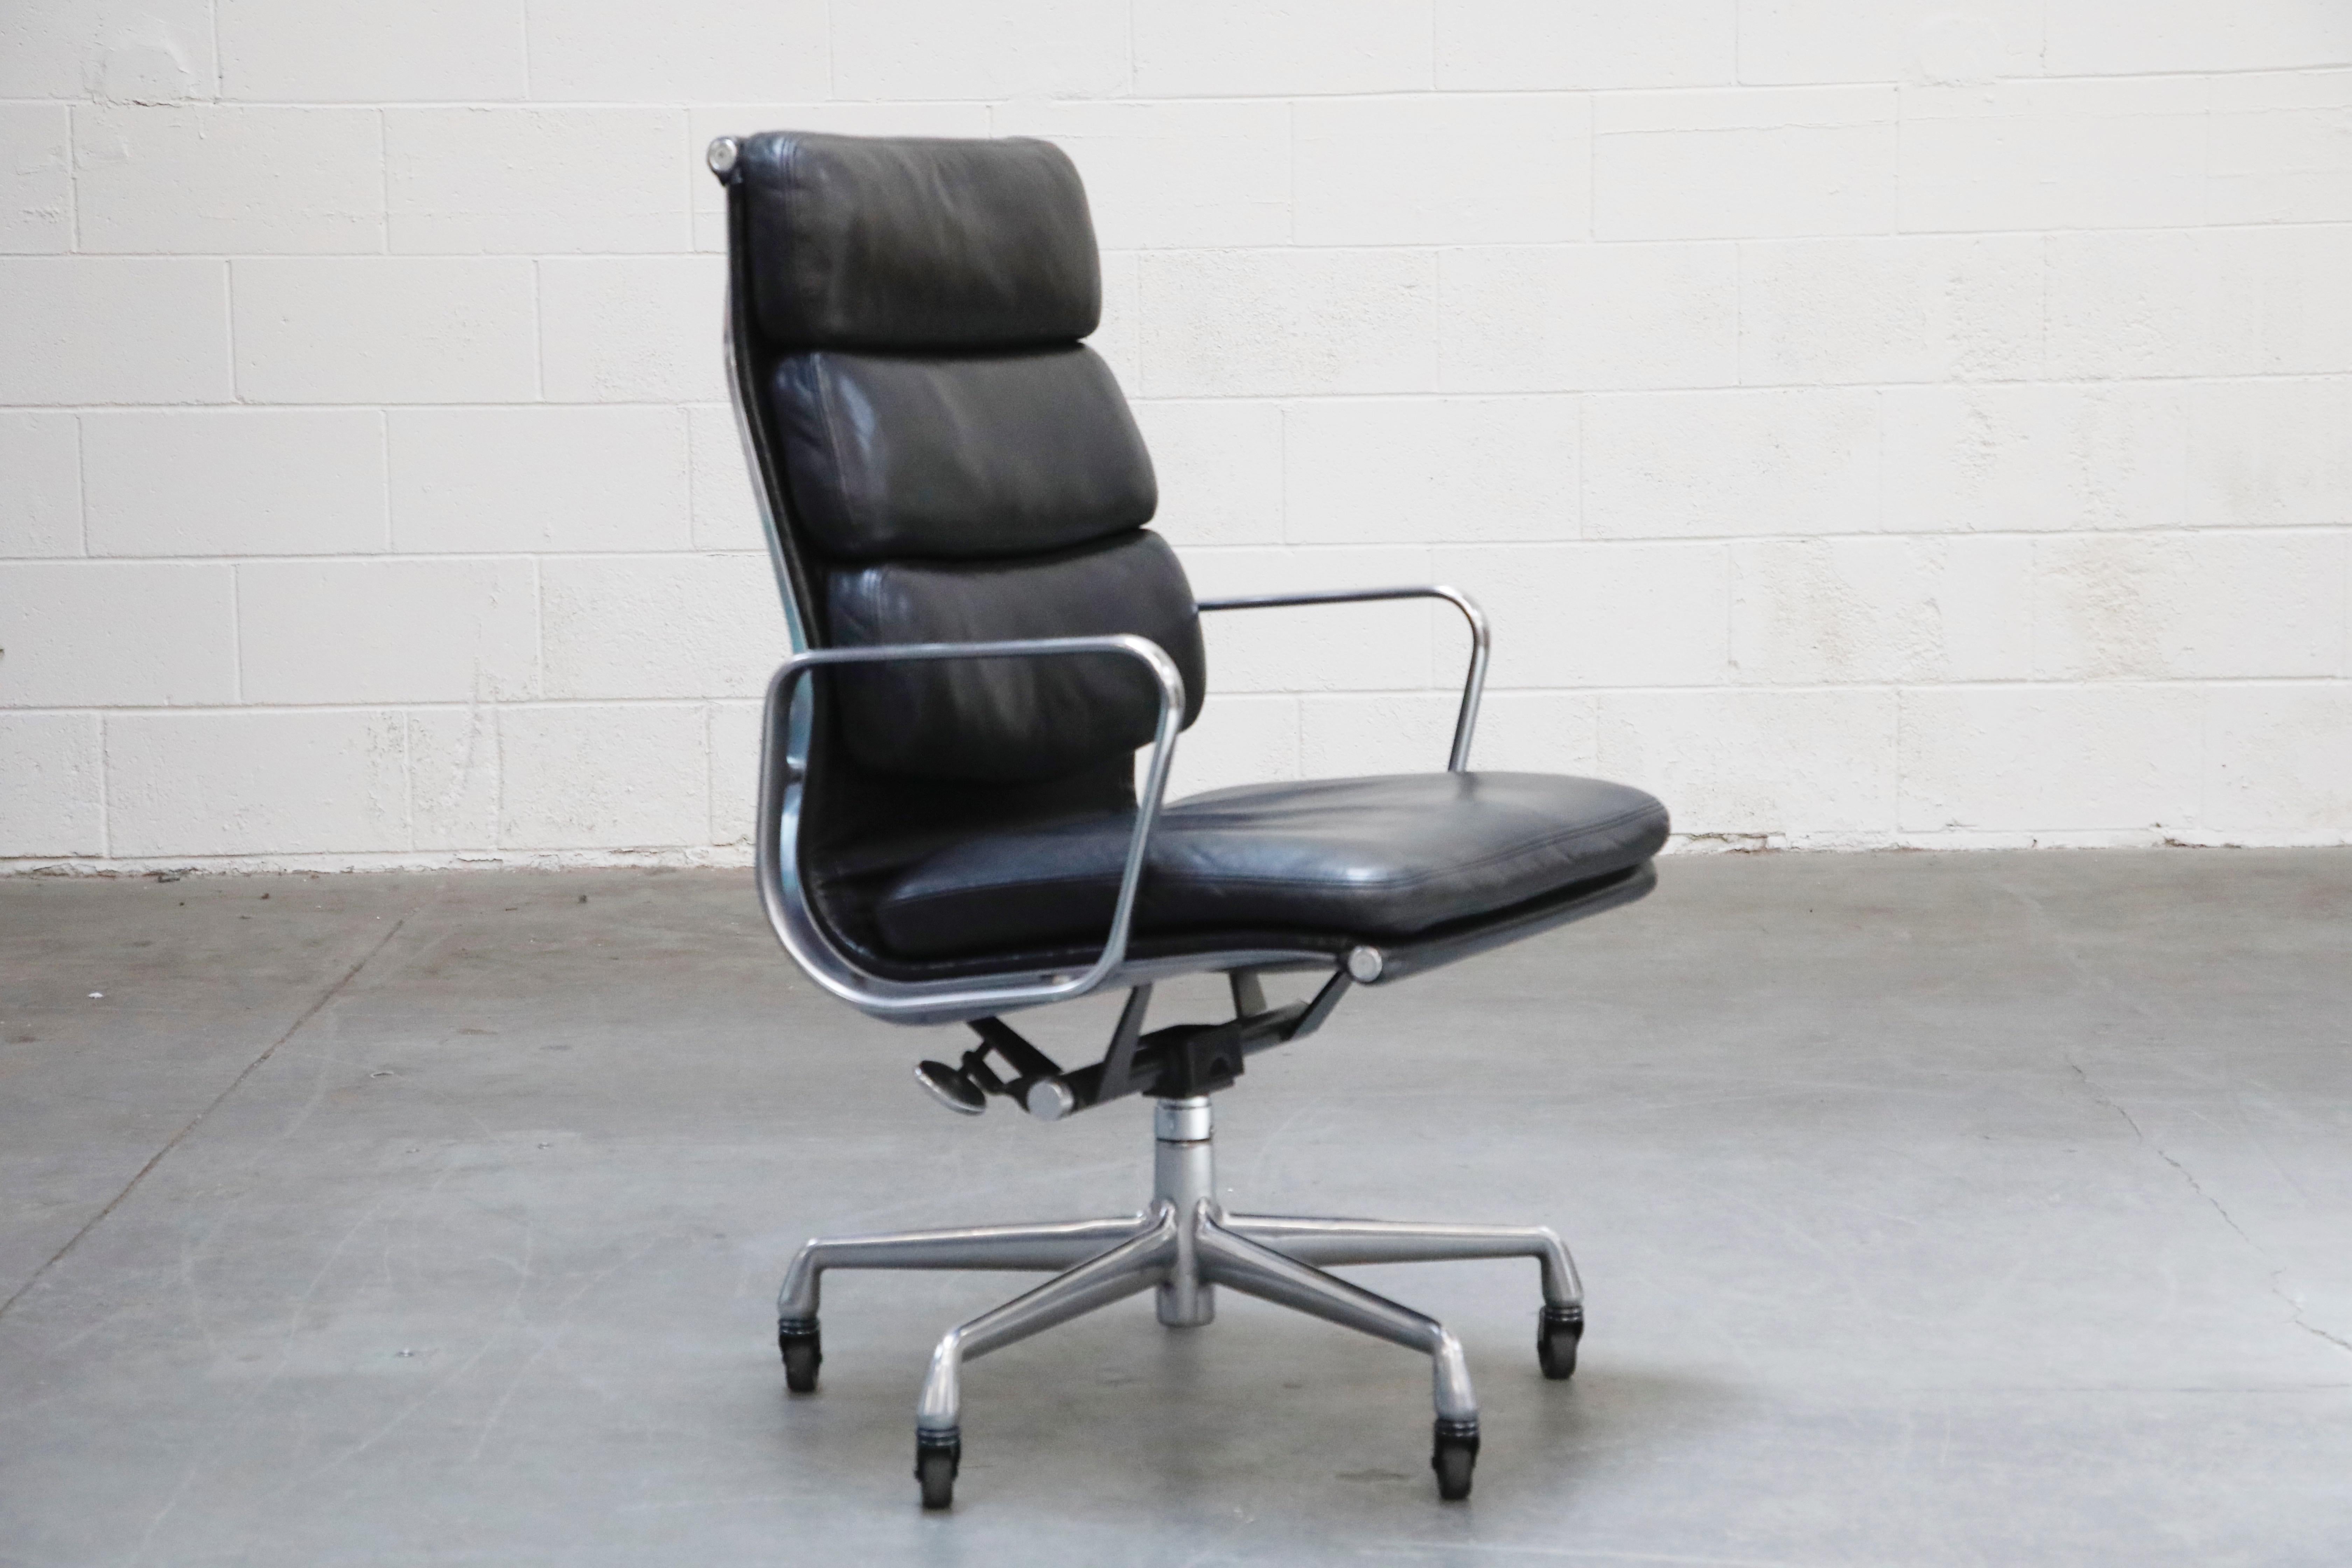 Mid-Century Modern Charles Eames for Herman Miller Soft-Pad Executive Desk Chairs, Signed